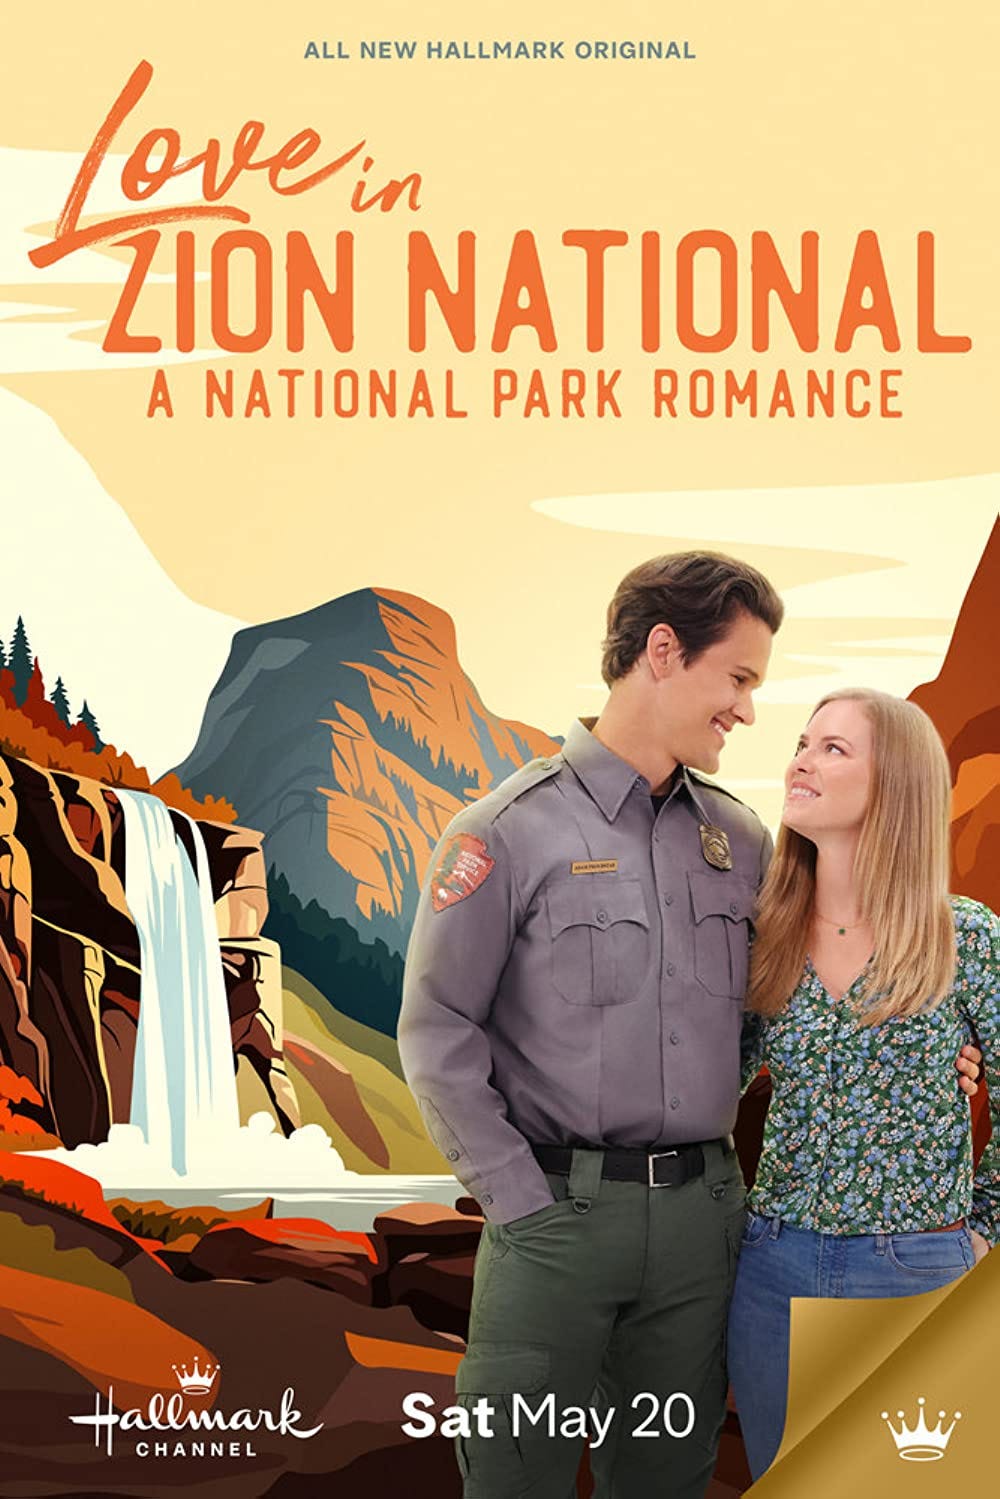 Love in Zion National: A National Park Romance (TV Movie 2023) - IMDb